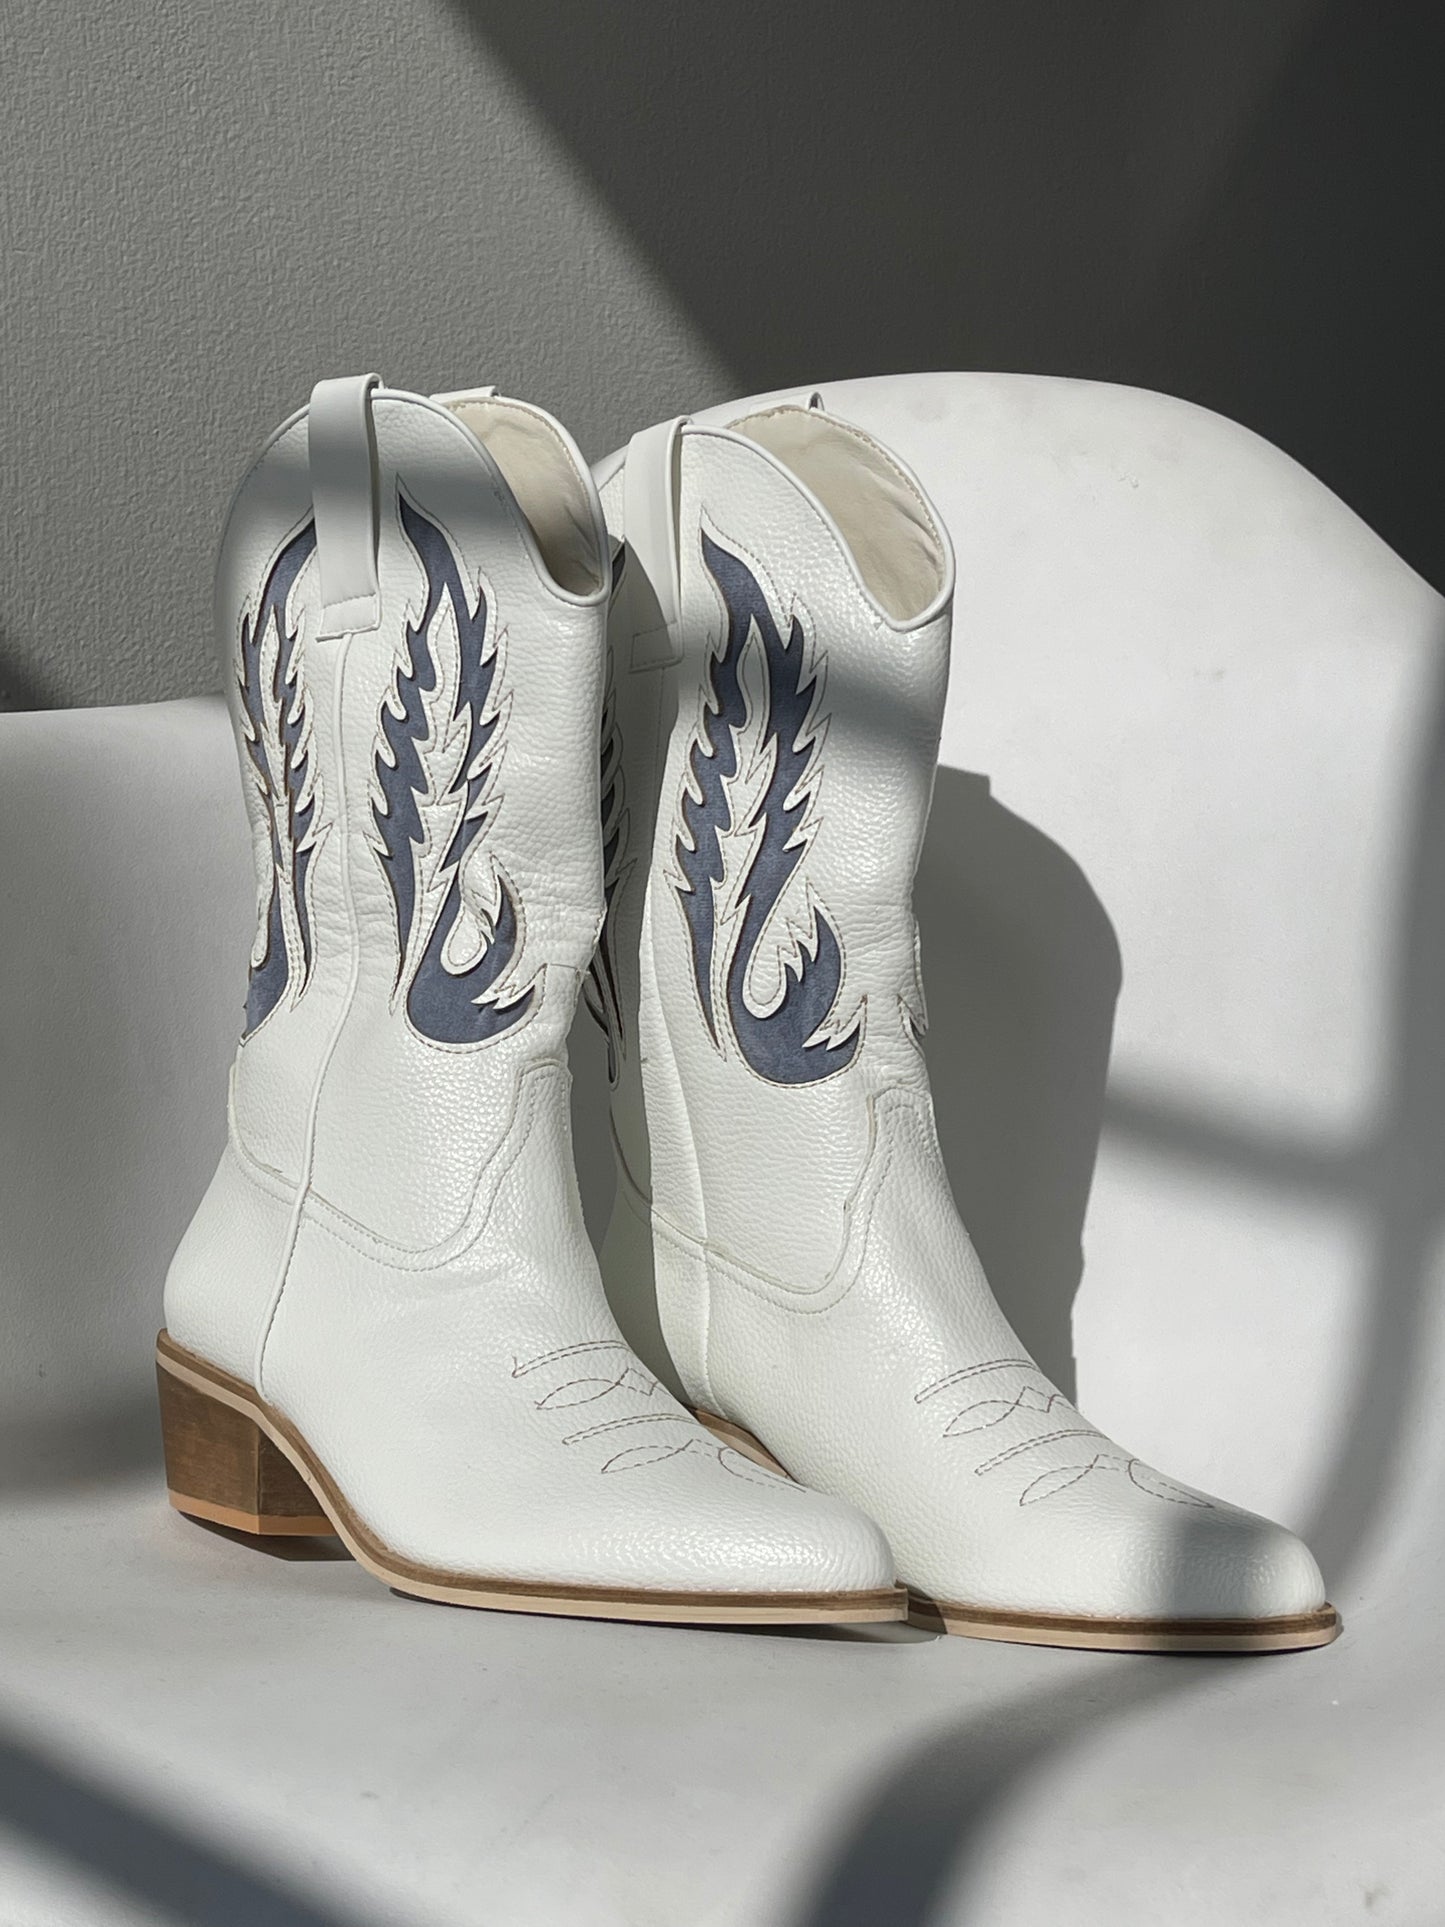 Wesley Classic Western Style Cowboy Boot In White Denim